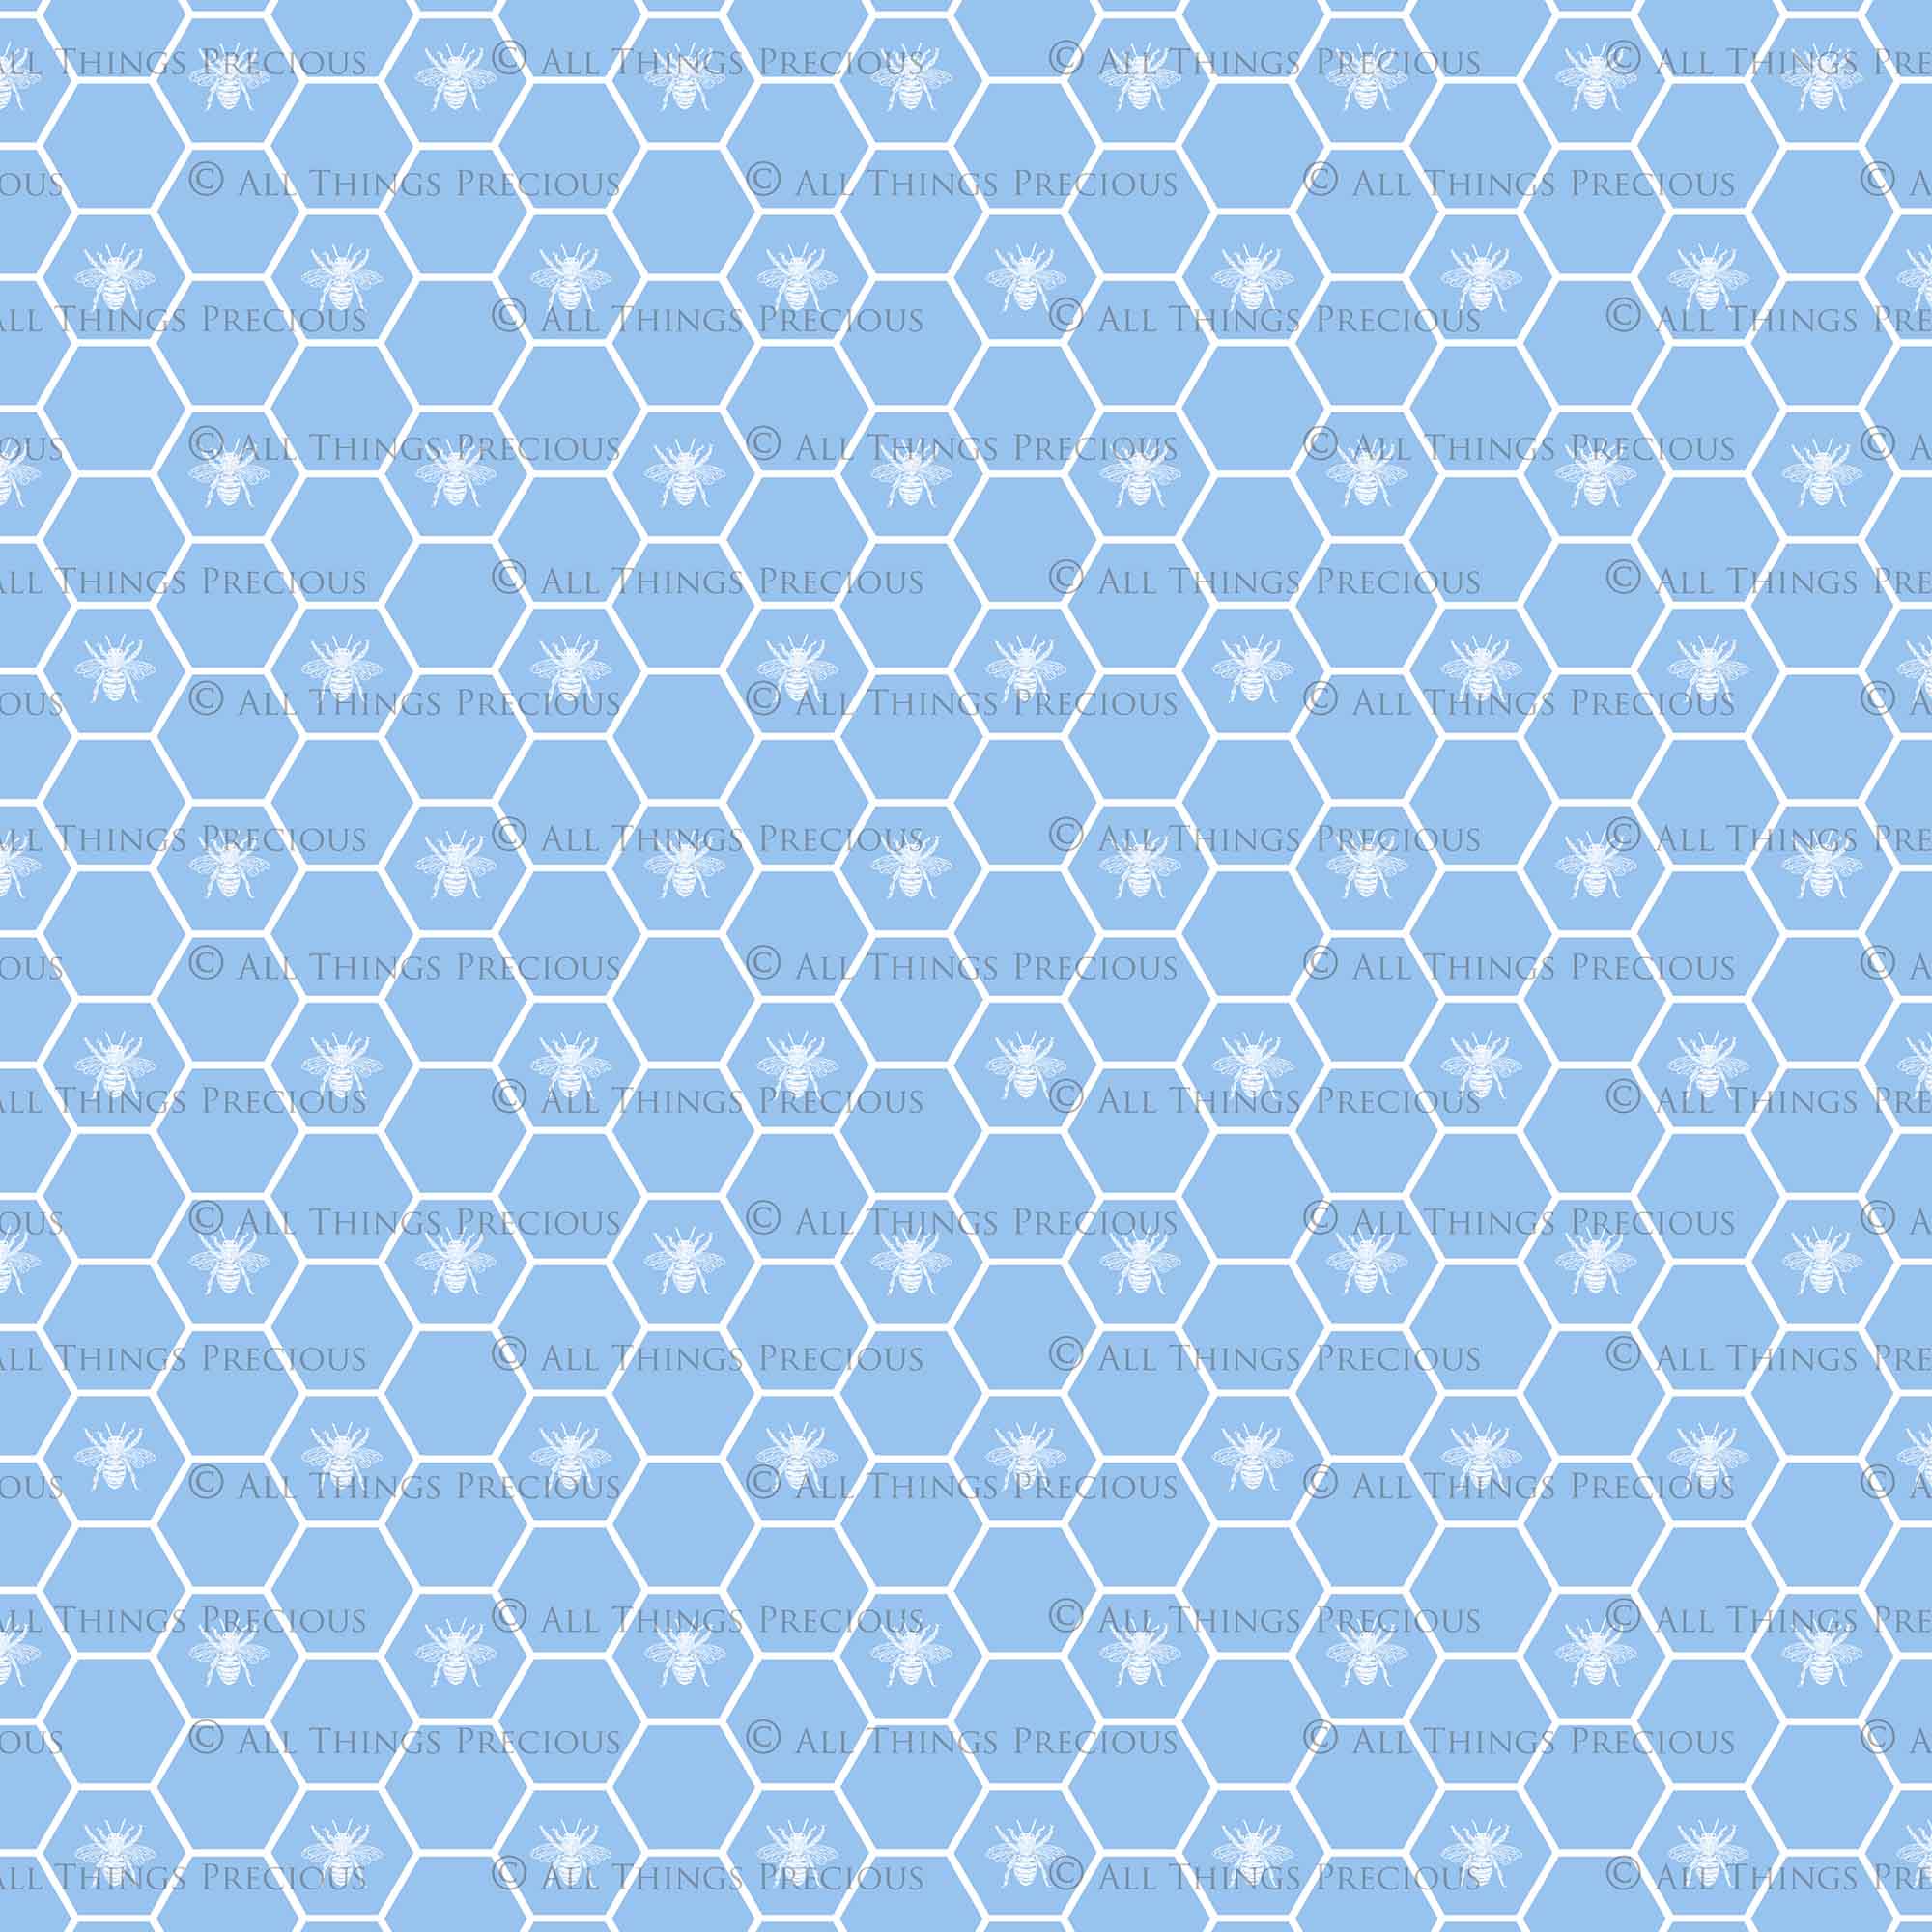 FRENCH BEE Digital Papers - BLUE